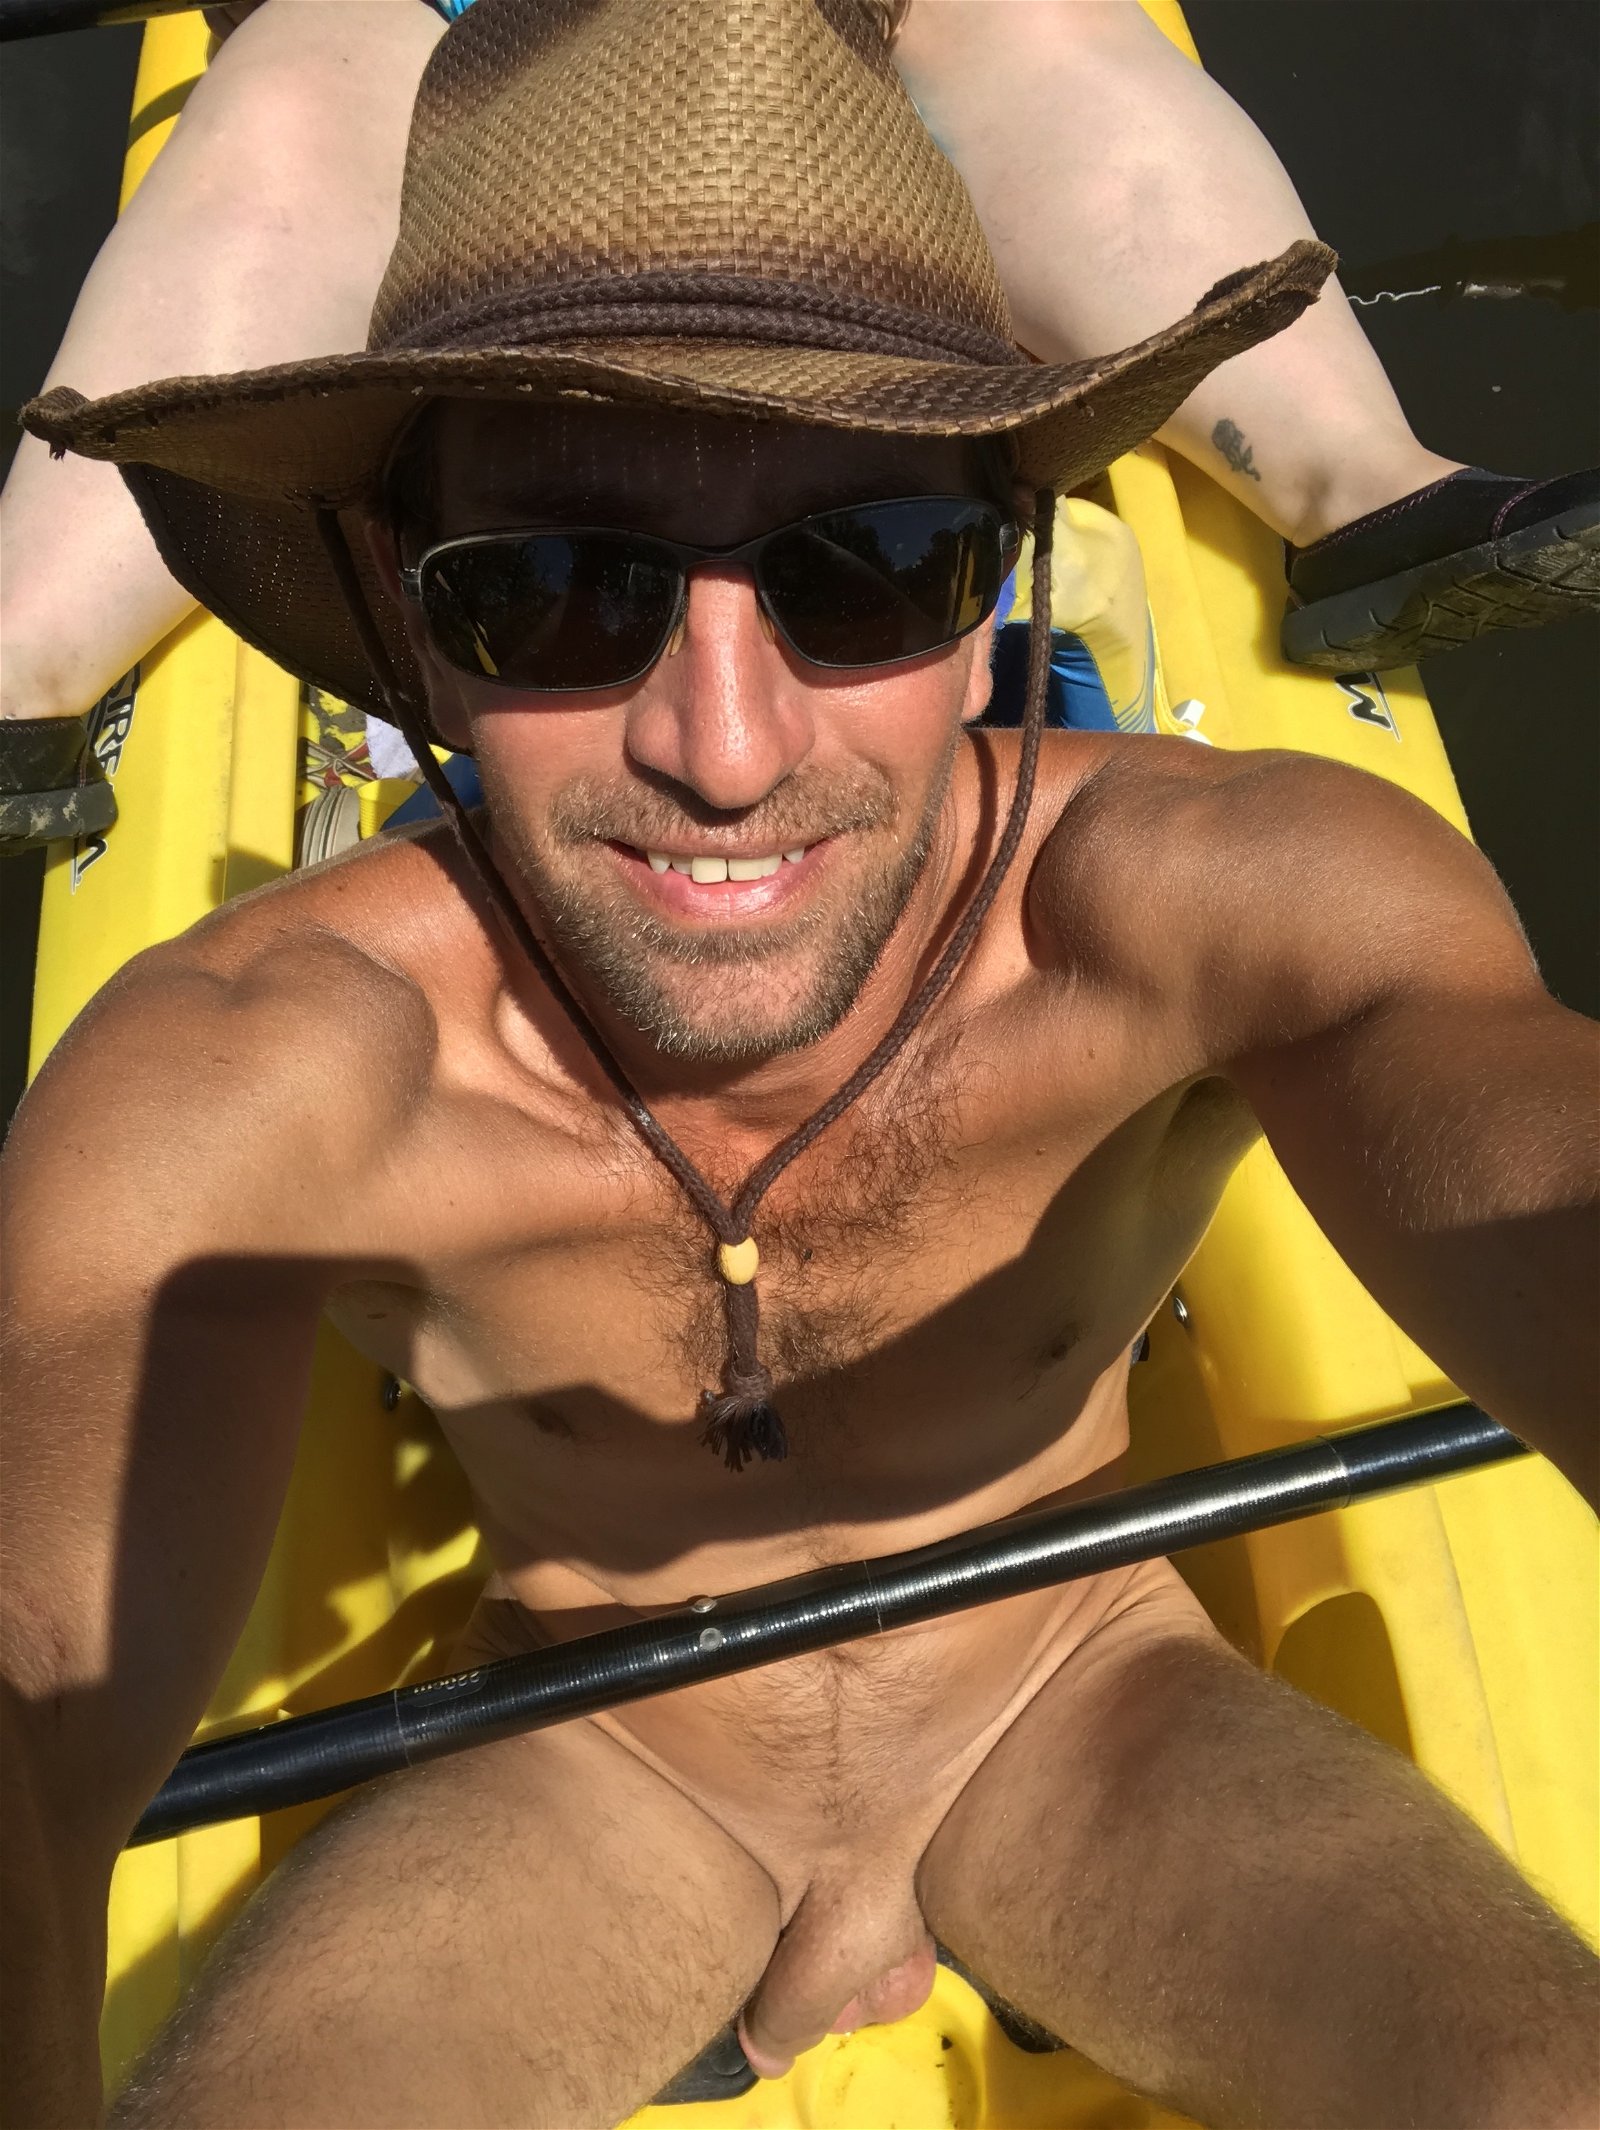 Photo by R J with the username @RJ720729, who is a verified user,  March 31, 2019 at 10:51 PM. The post is about the topic Nudists and Naturists